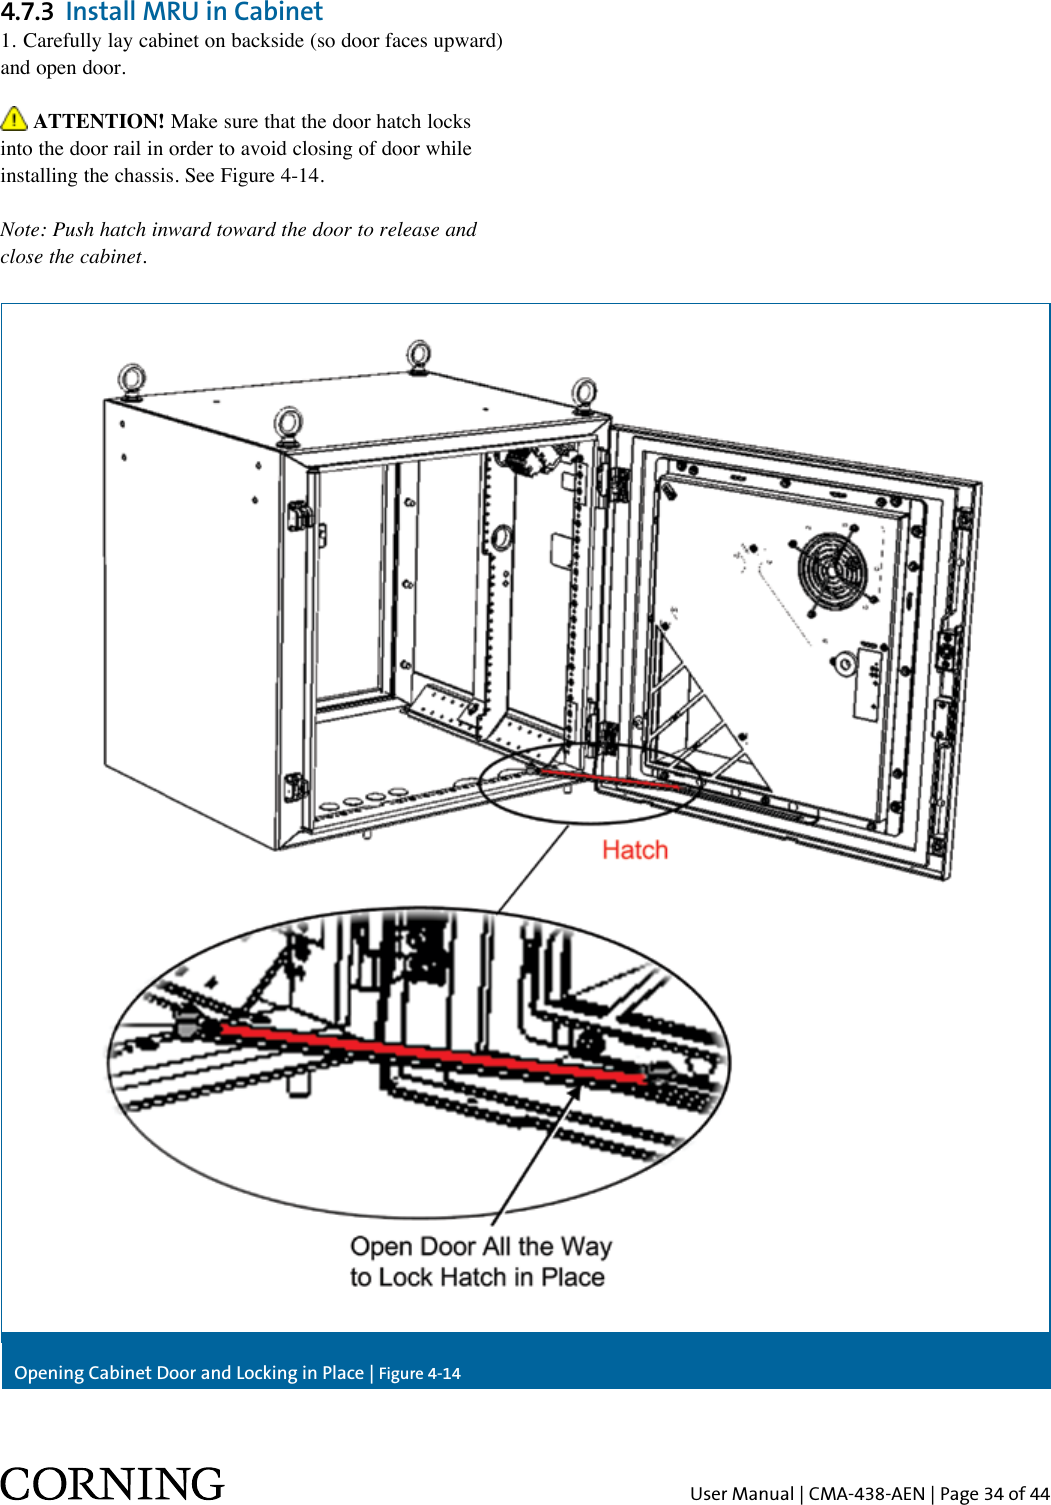 User Manual | CMA-438-AEN | Page 34 of 44Opening Cabinet Door and Locking in Place | Figure 4-144.7.3  Install MRU in Cabinet1. Carefully lay cabinet on backside (so door faces upward) and open door. ATTENTION! Make sure that the door hatch locks into the door rail in order to avoid closing of door while installing the chassis. See Figure 4-14.Note: Push hatch inward toward the door to release and close the cabinet.